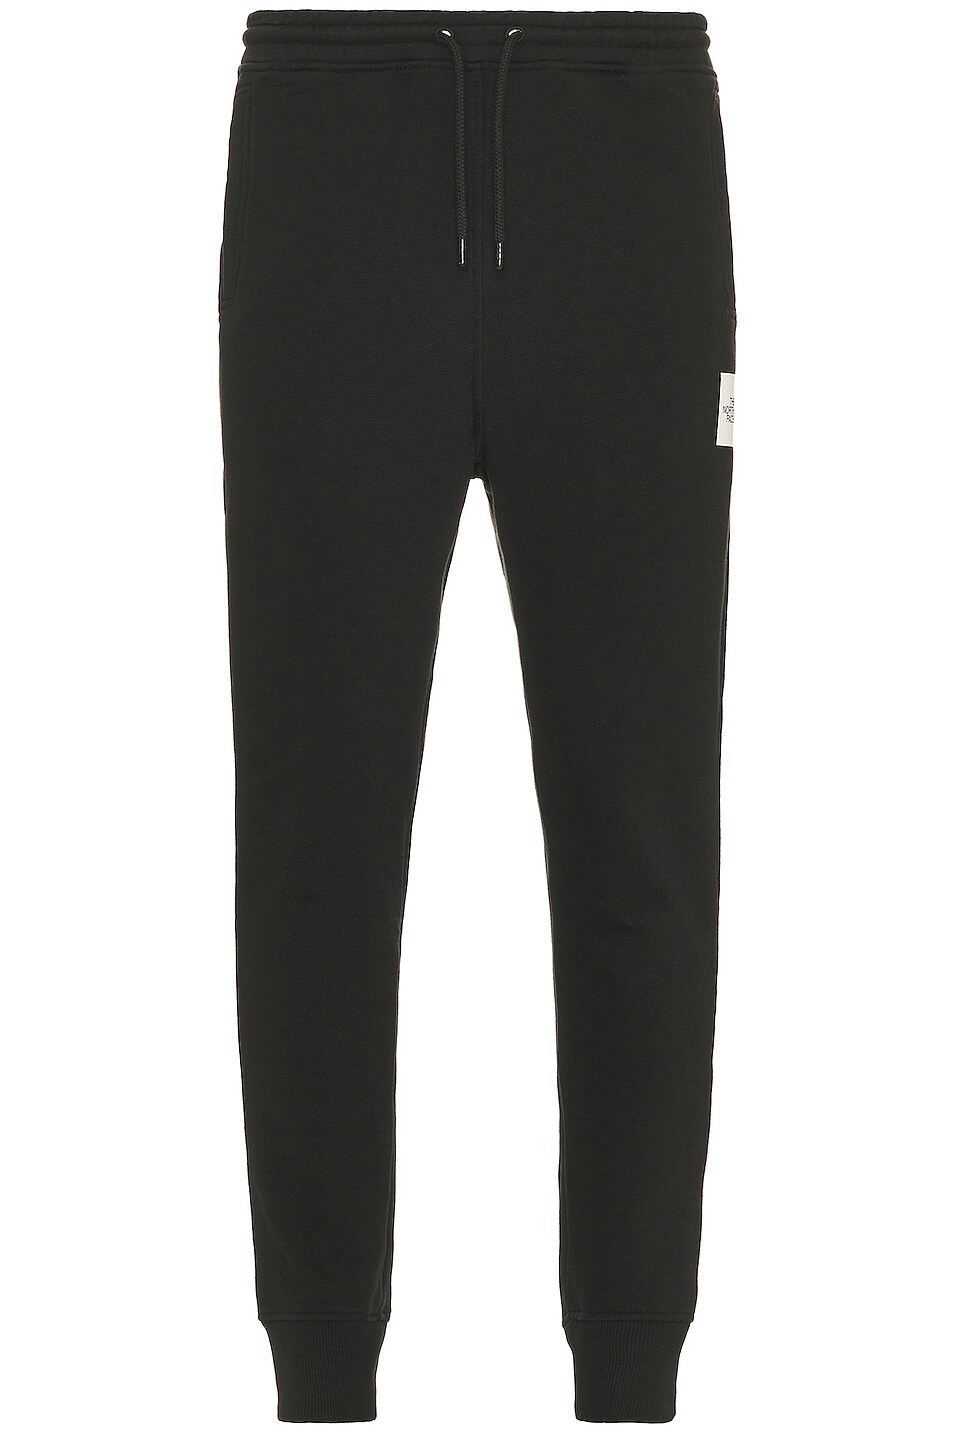 Image 1 of The North Face Box Nse Jogger Sweaterpants in Tnf Black & Tnf White